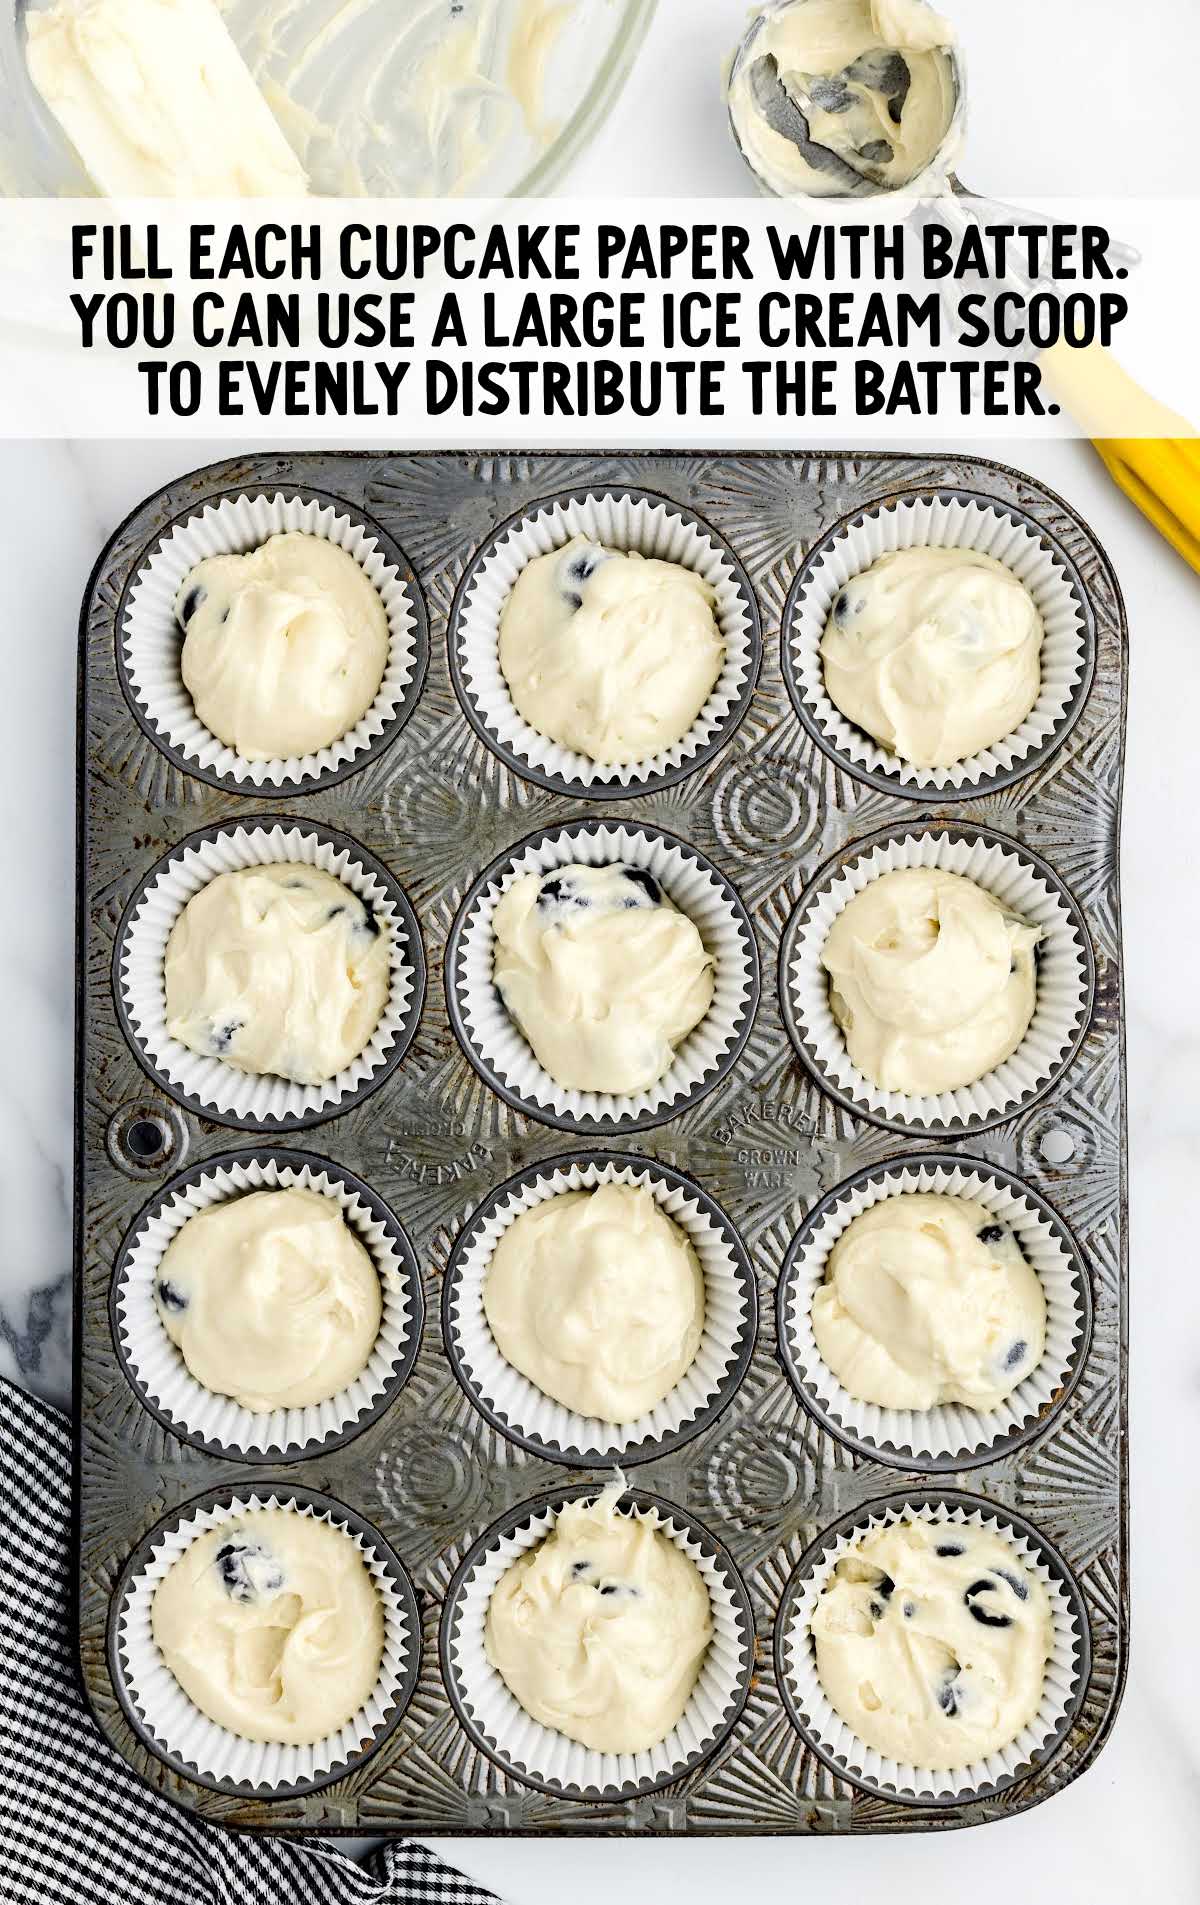 fill each cupcake paper with batter